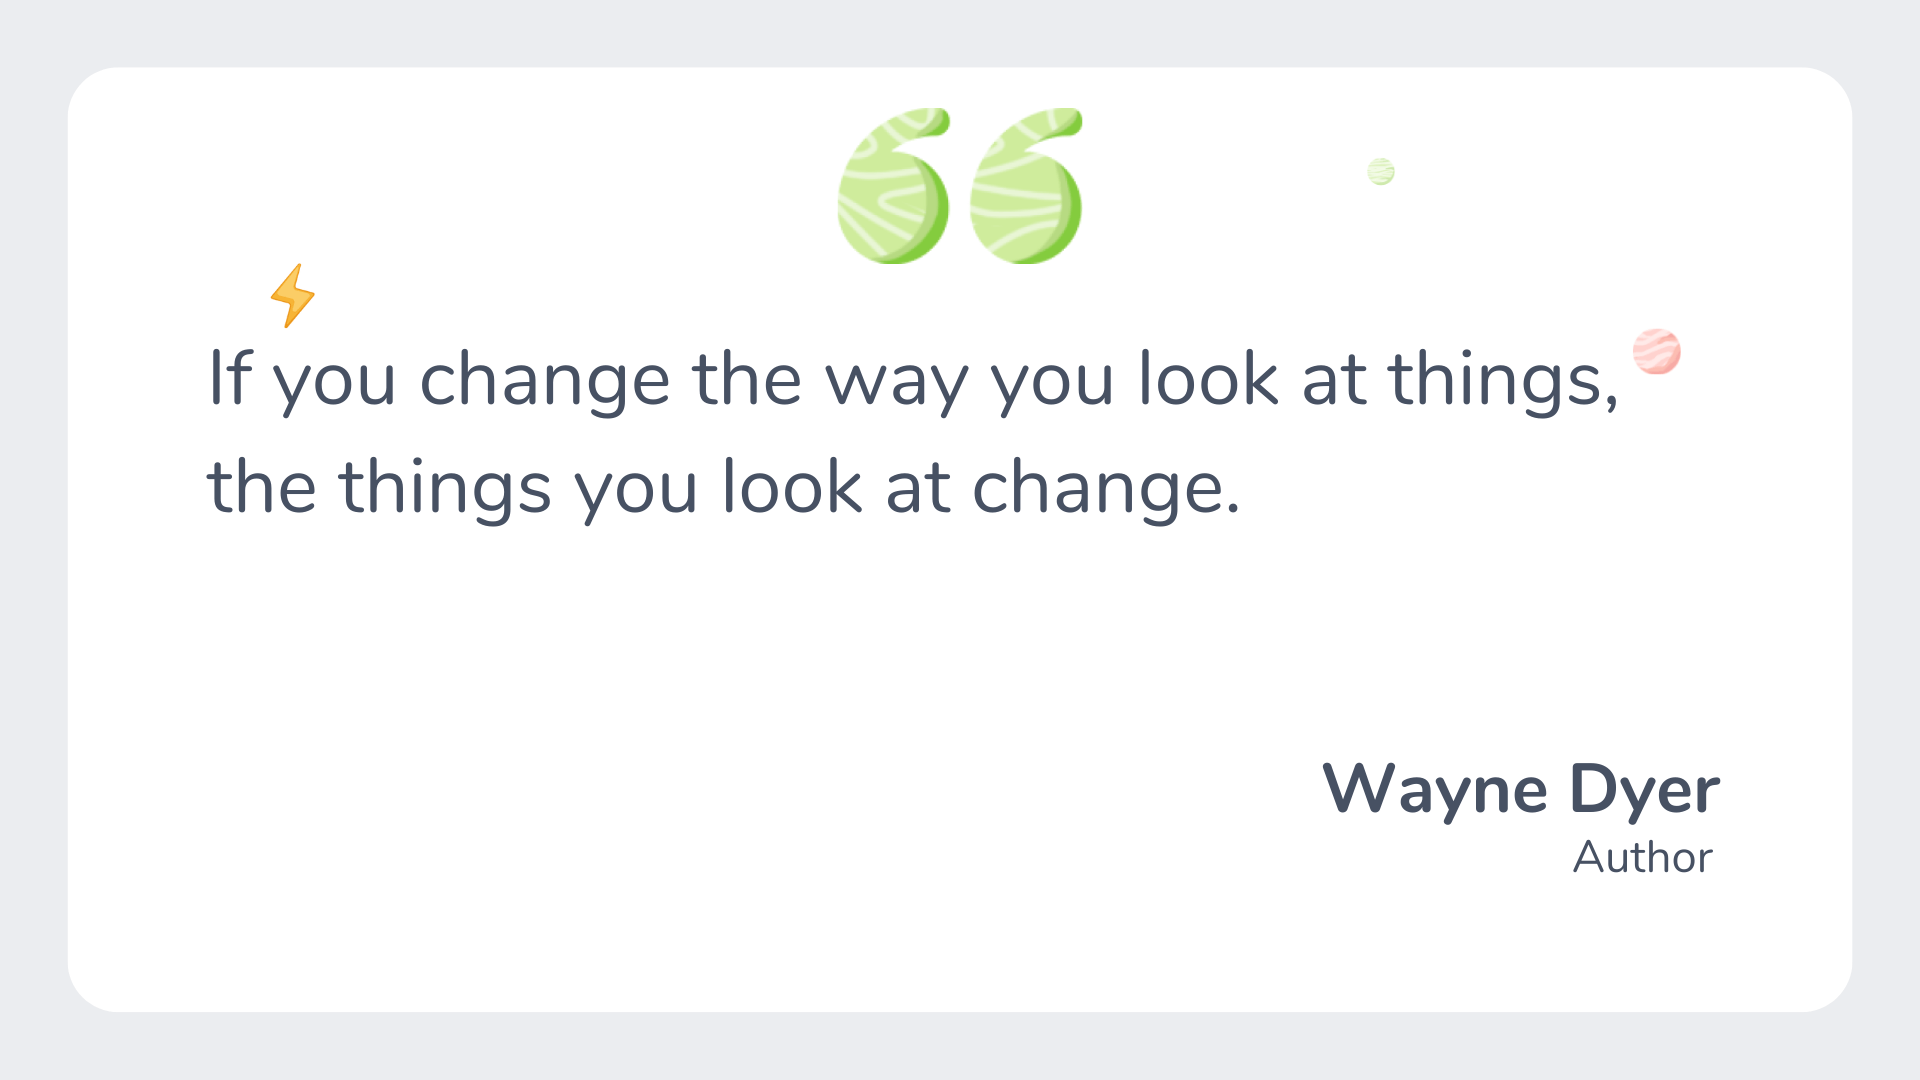 Quote by Wayne Dyer (Author)